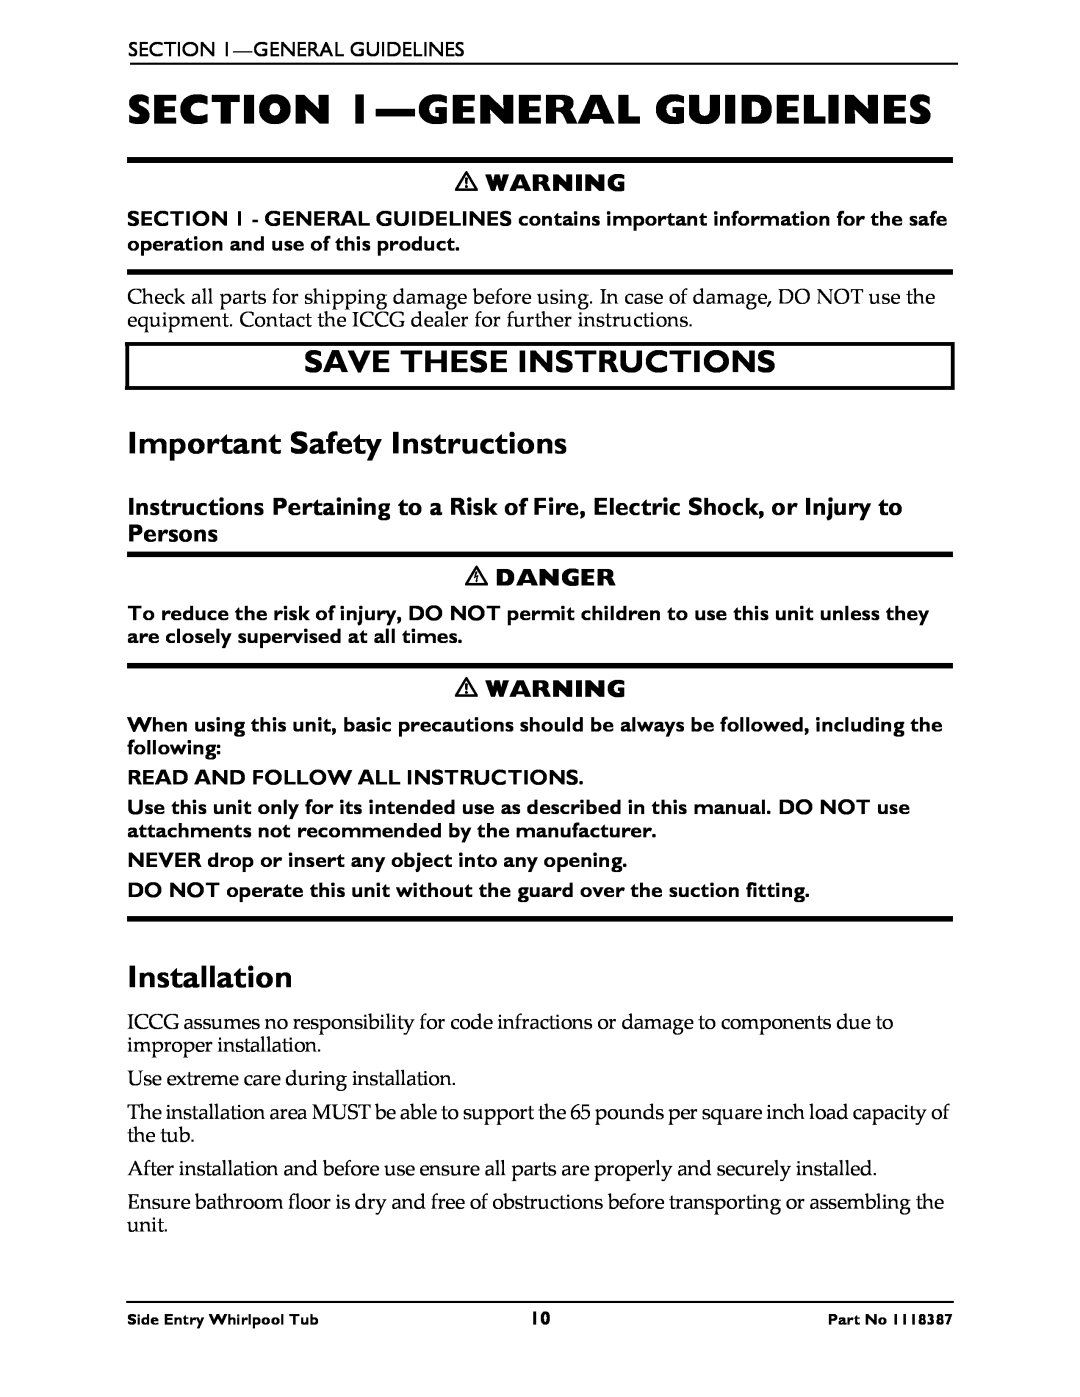 Invacare 3650 manual General Guidelines, SAVE THESE INSTRUCTIONS Important Safety Instructions, Installation, Danger 